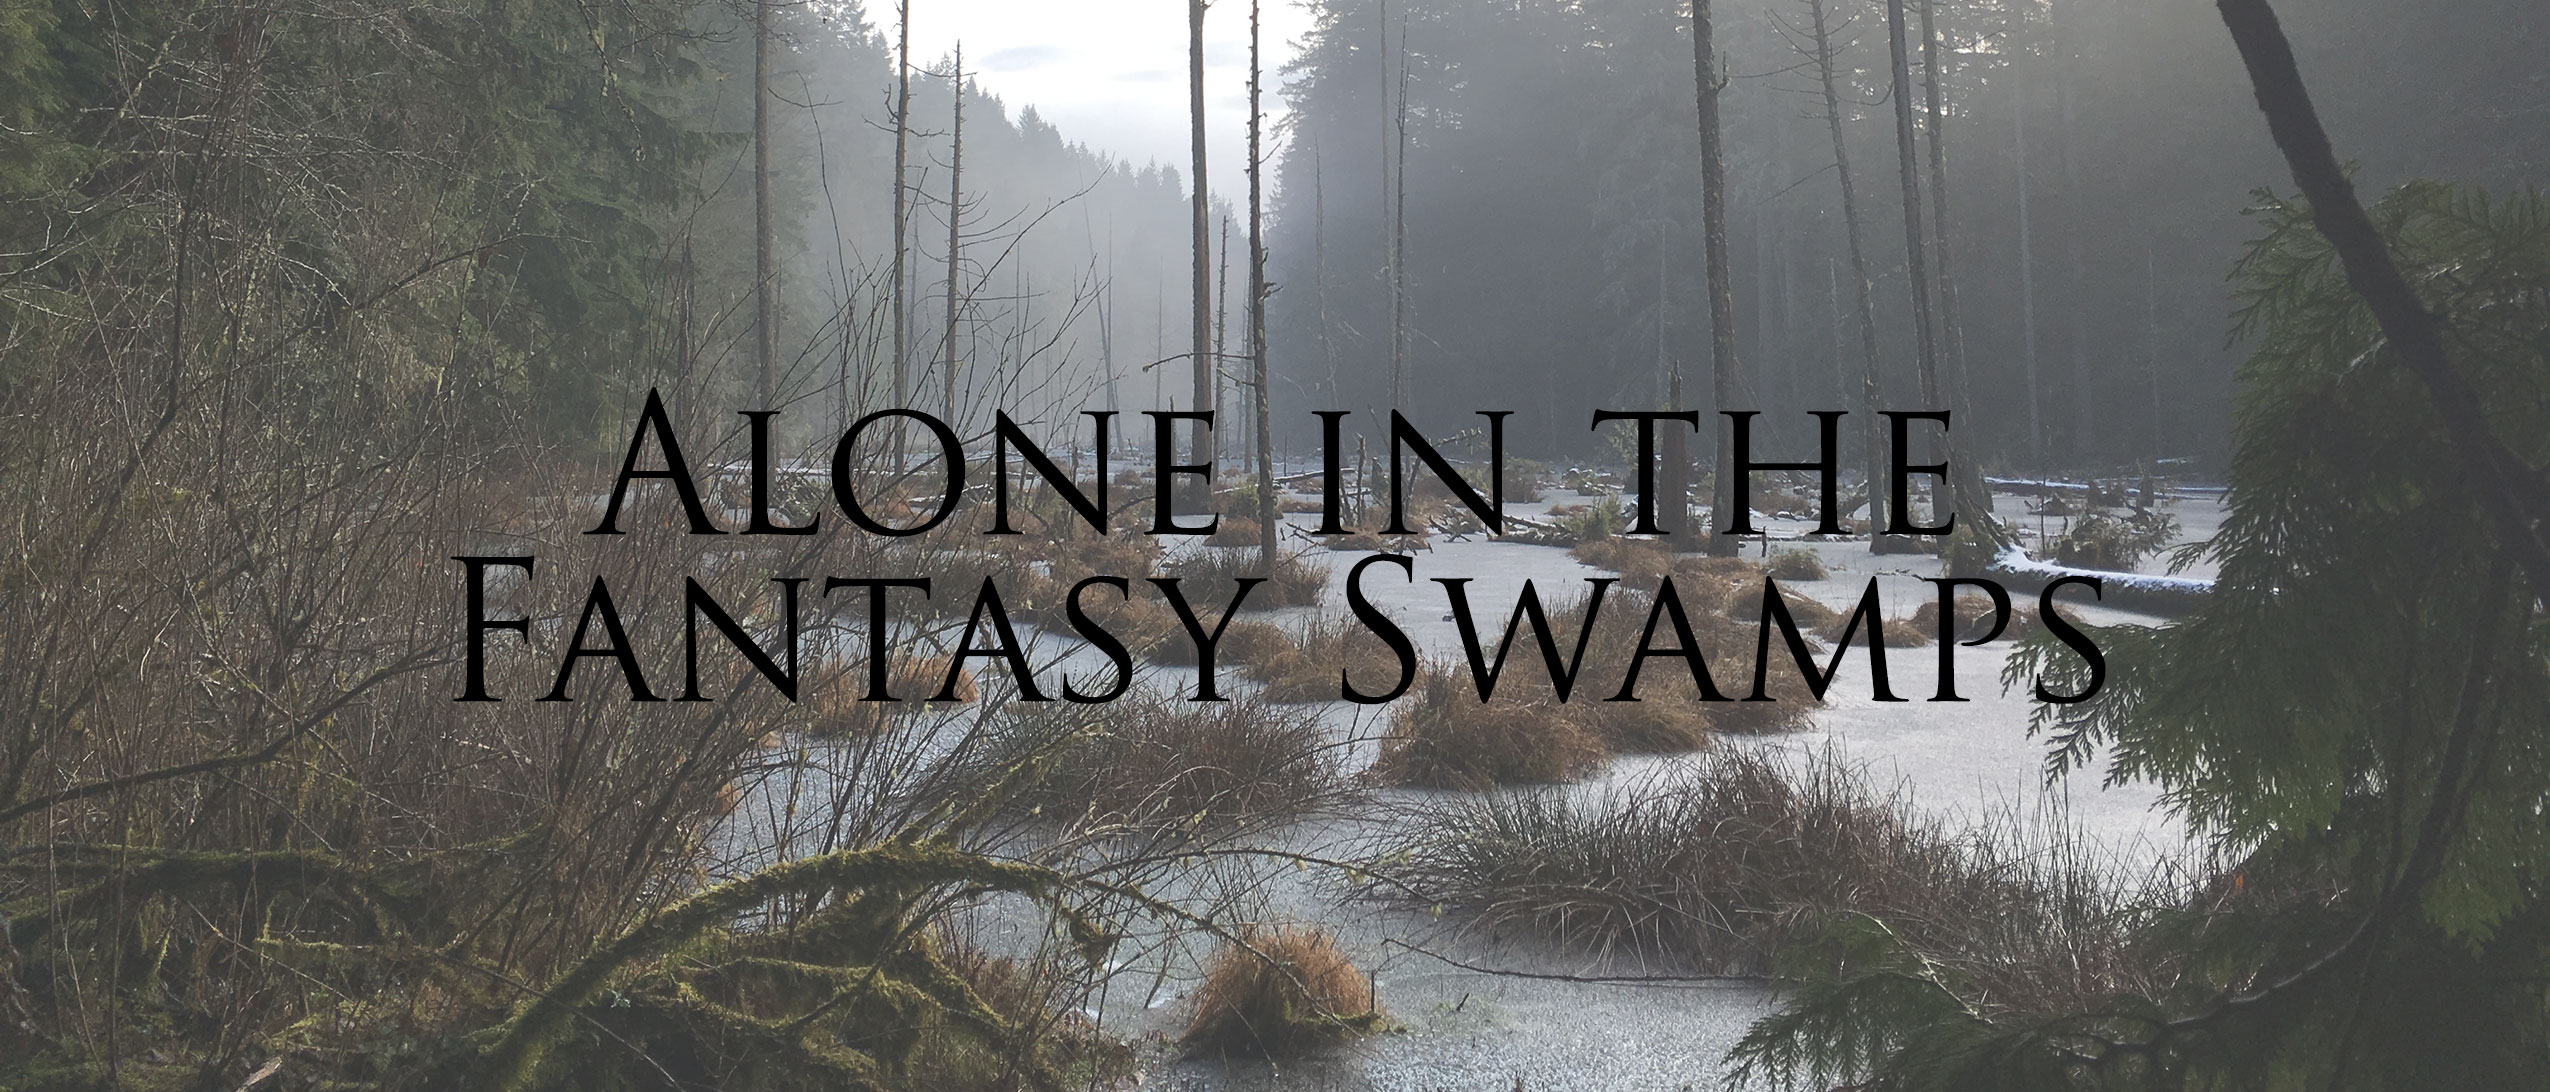 Alone in the Fantasy Swamps